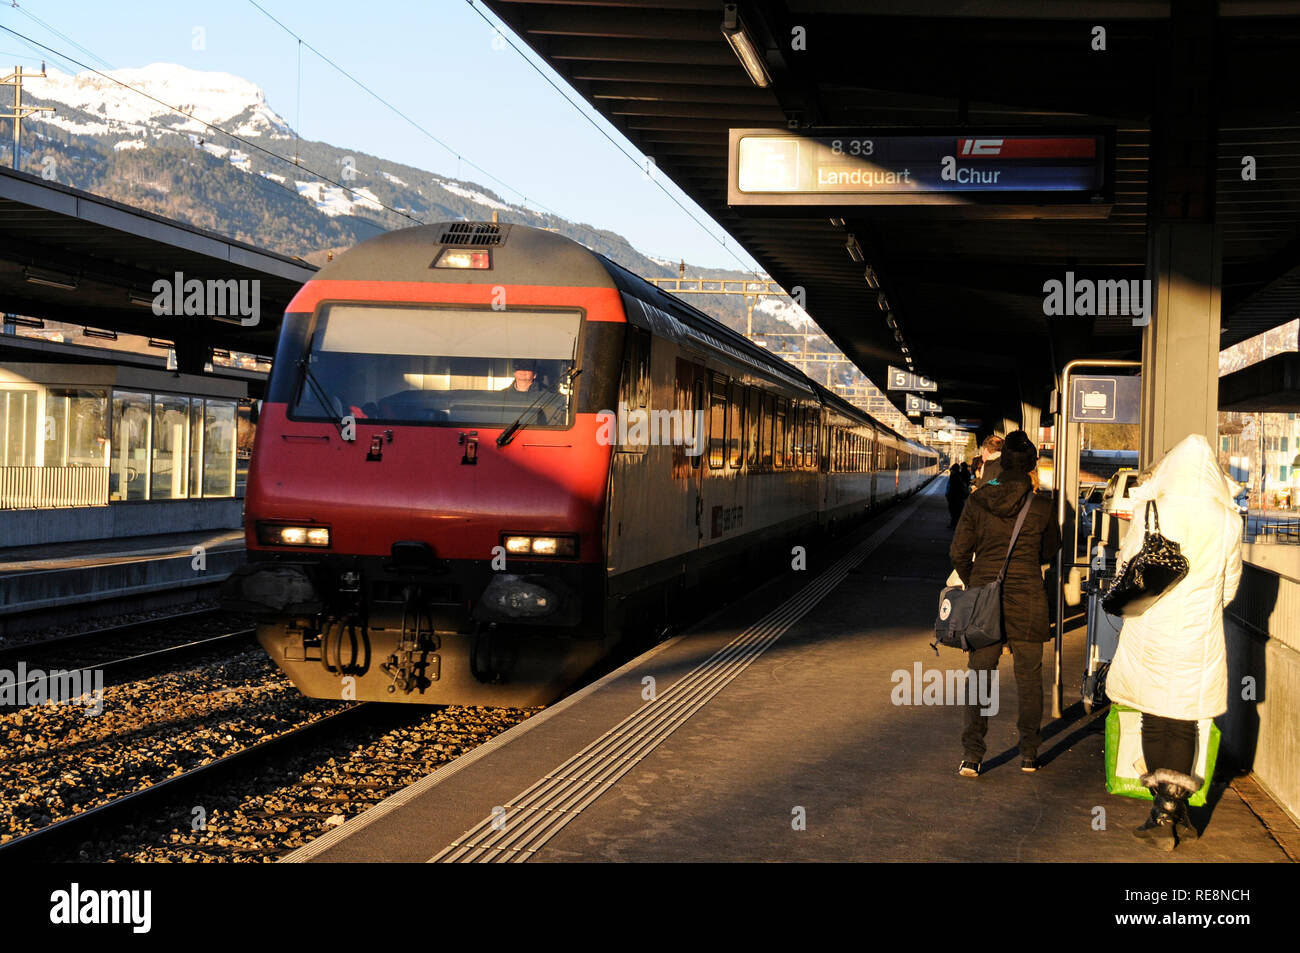 An A Swiss Inter-City express train pulls in at Landquart en route to Chur Stock Photo